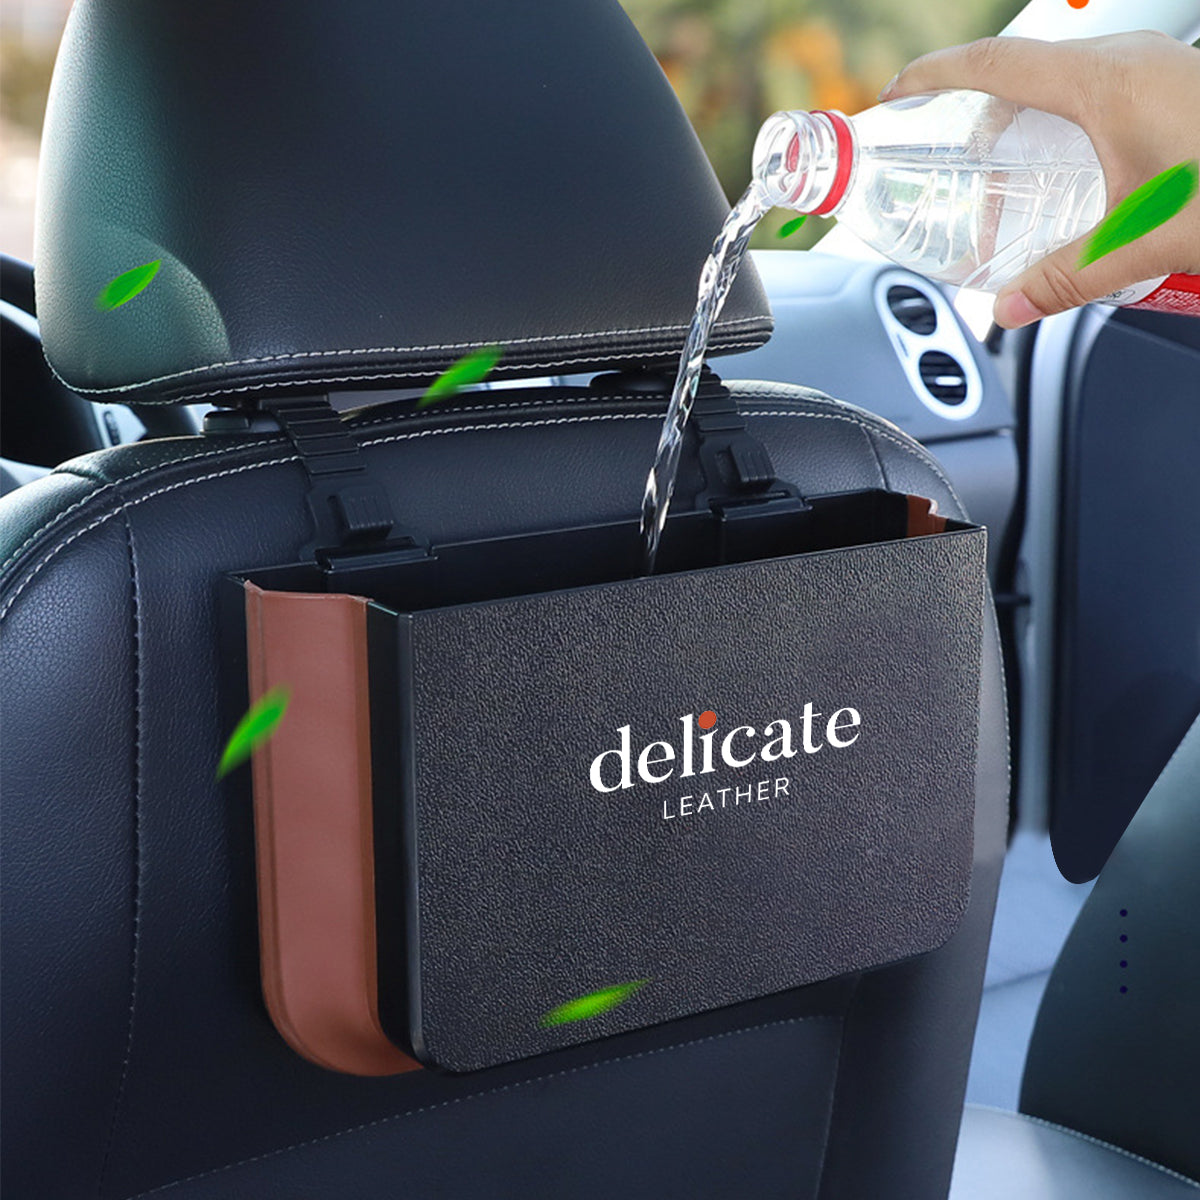 Delicate Leather Hanging Waterproof Car Trash can-Foldable, Custom For Your Cars, Waterproof, and Equipped with Cup Holders and Trays. Multi-Purpose, Car Accessories VE11992